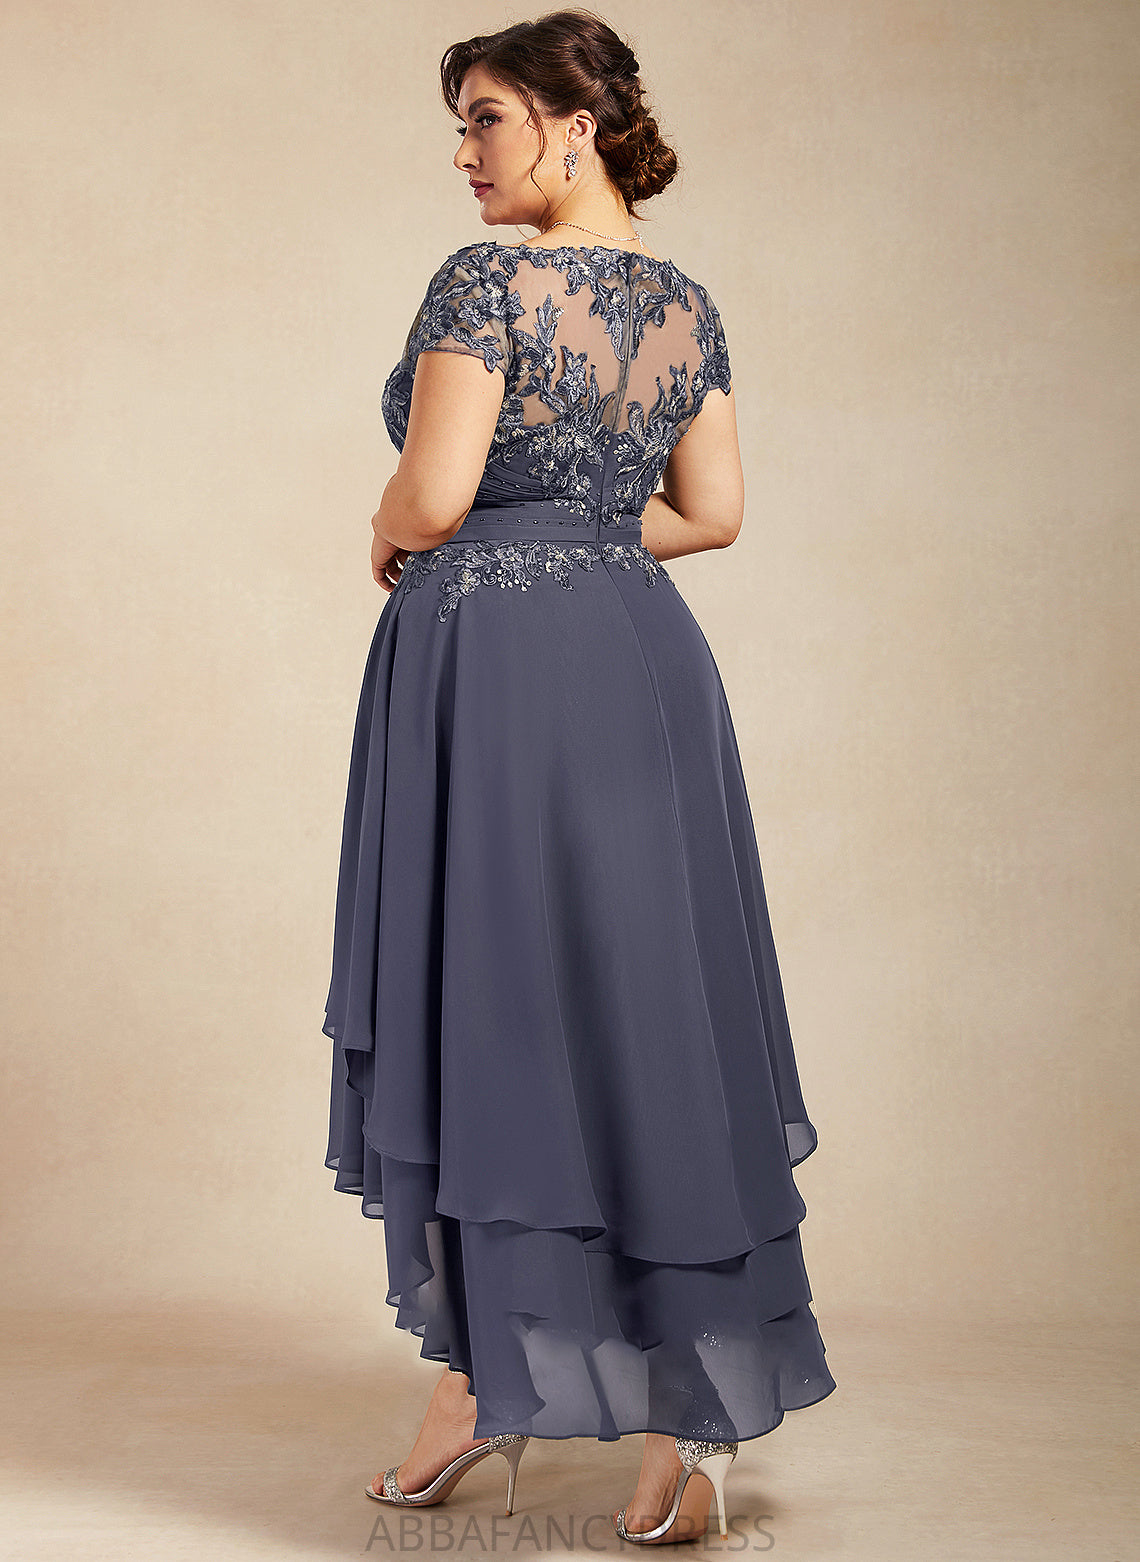 Scoop Beading With A-Line Mother of the Bride Dresses of Asymmetrical the Dress Bride Mother Chiffon Lace Laura Neck